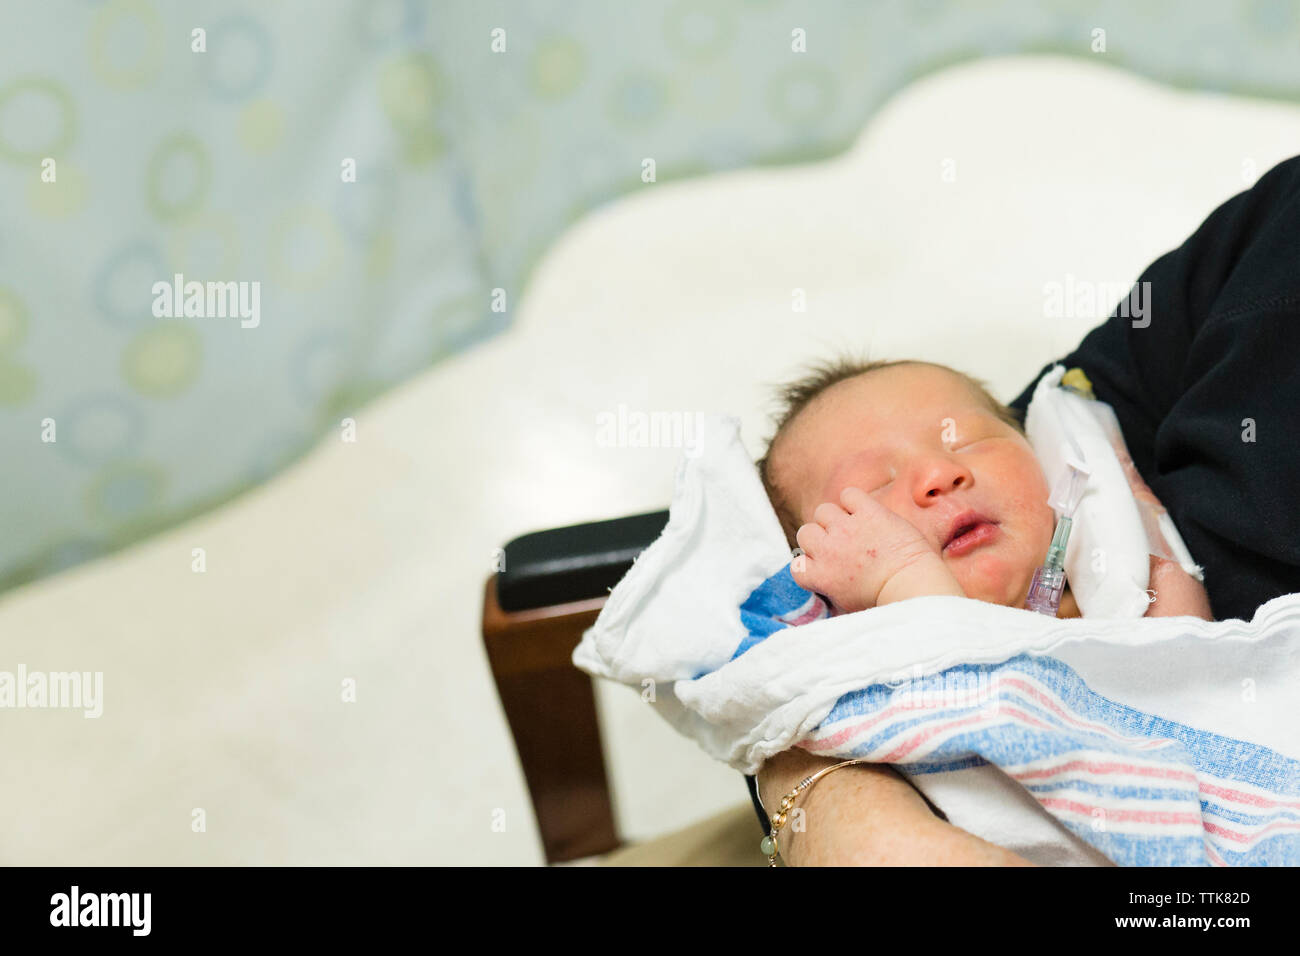 Newborn baby with hands near face being held in hospital room Stock Photo